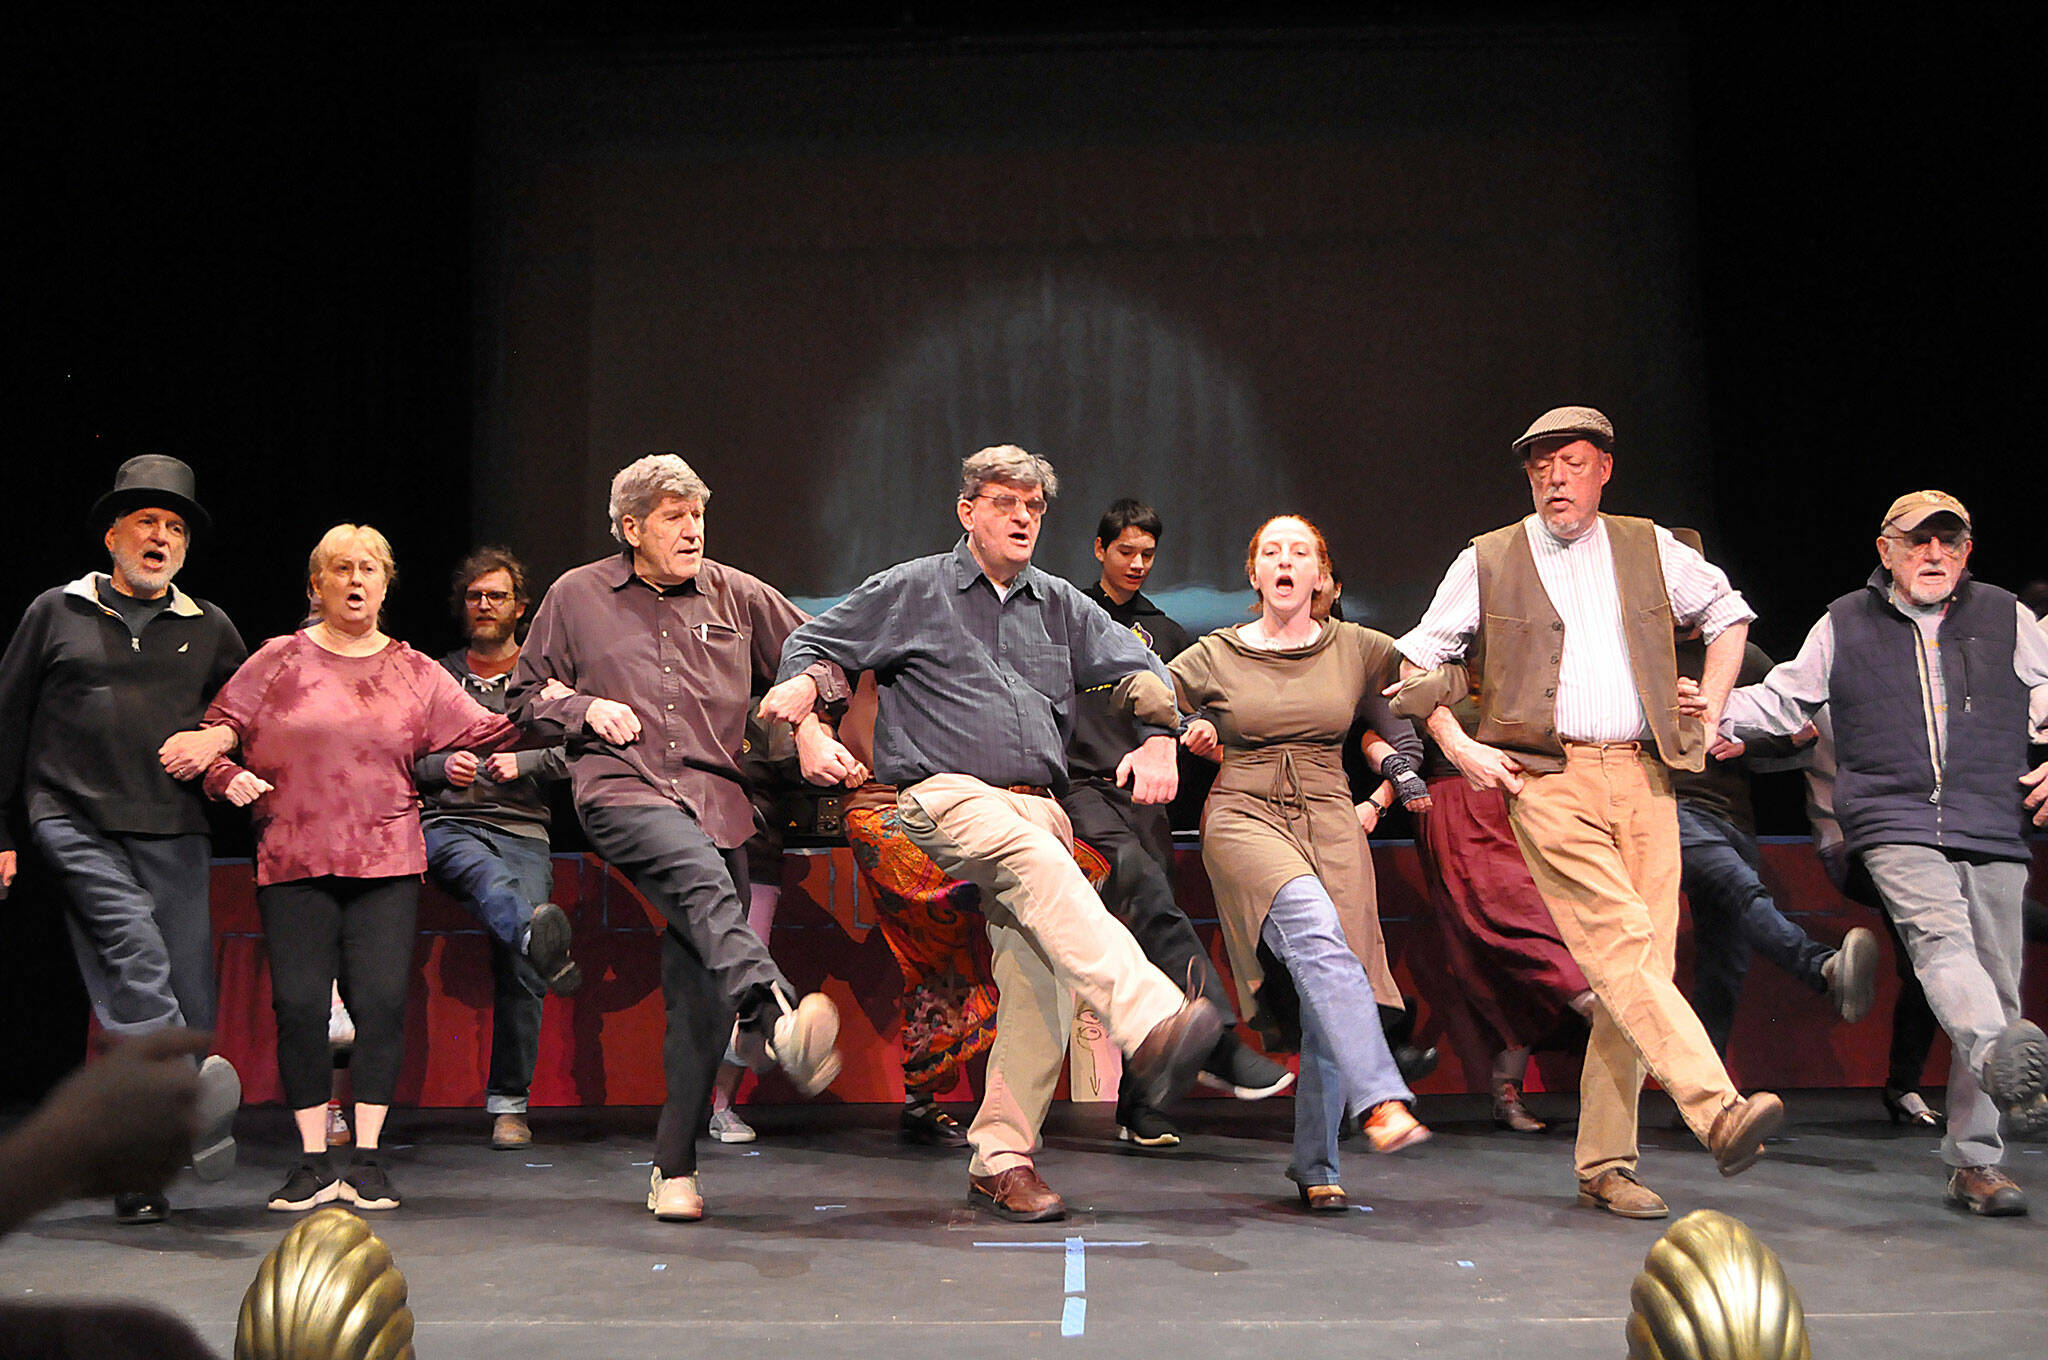 Sequim Gazette photoS by Matthew Nash
Cast members practice a dance number for “The Mystery of Edwin Drood” at Olympic Theatre Arts, which runs three weekends March 10-26. The musical comedy invites audience members’ participation to vote on the murderer, and more.